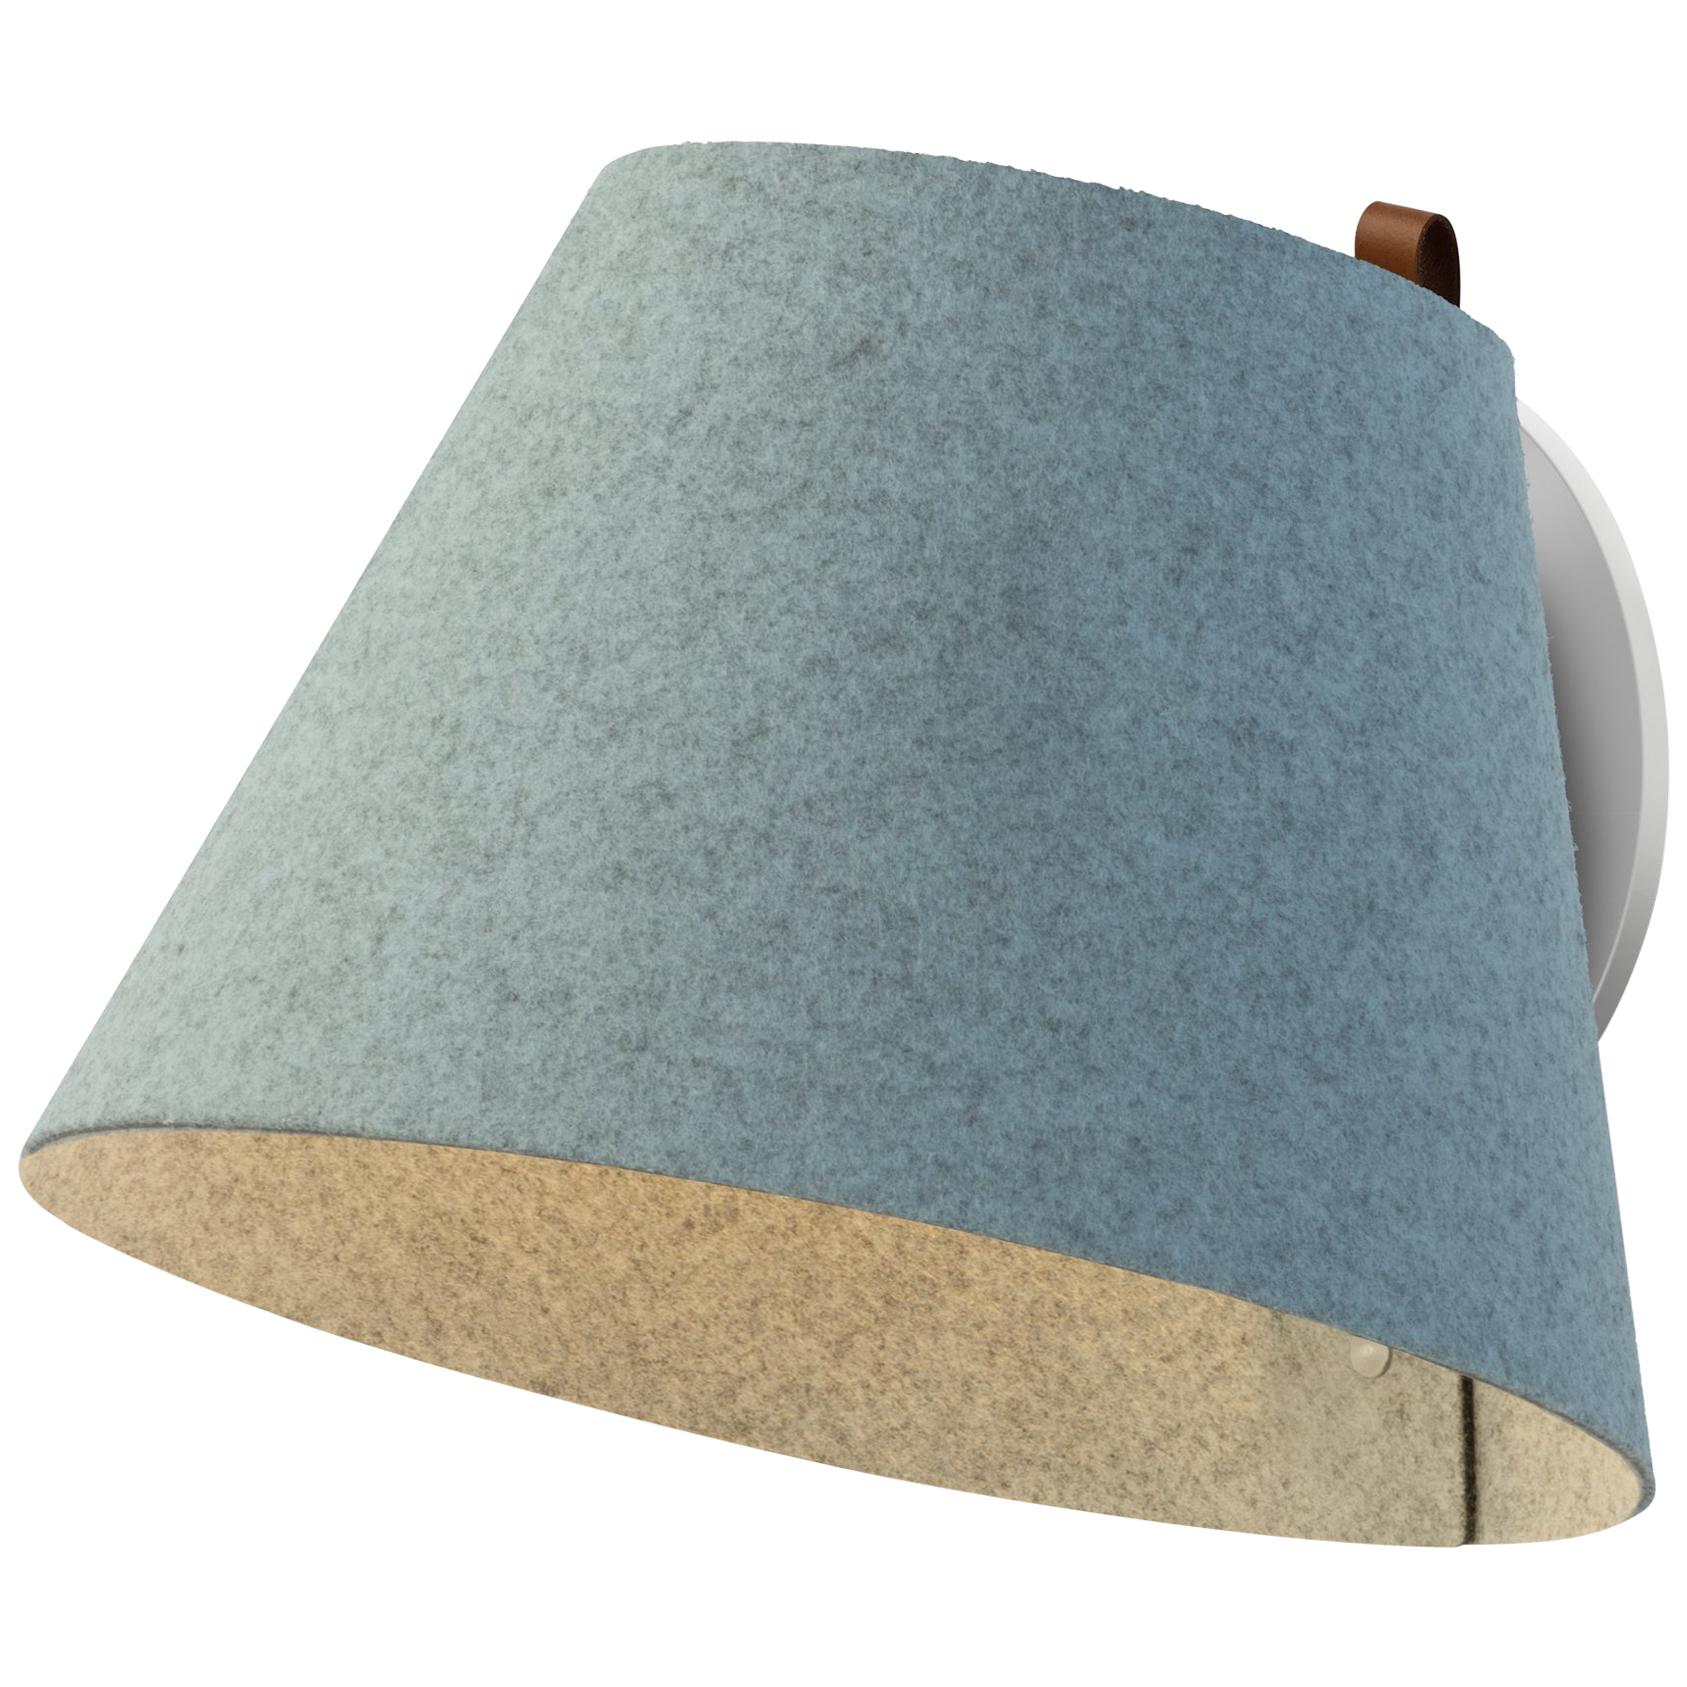 Lana Large Wall Light in Arctic Blue and Grey by Pablo Designs